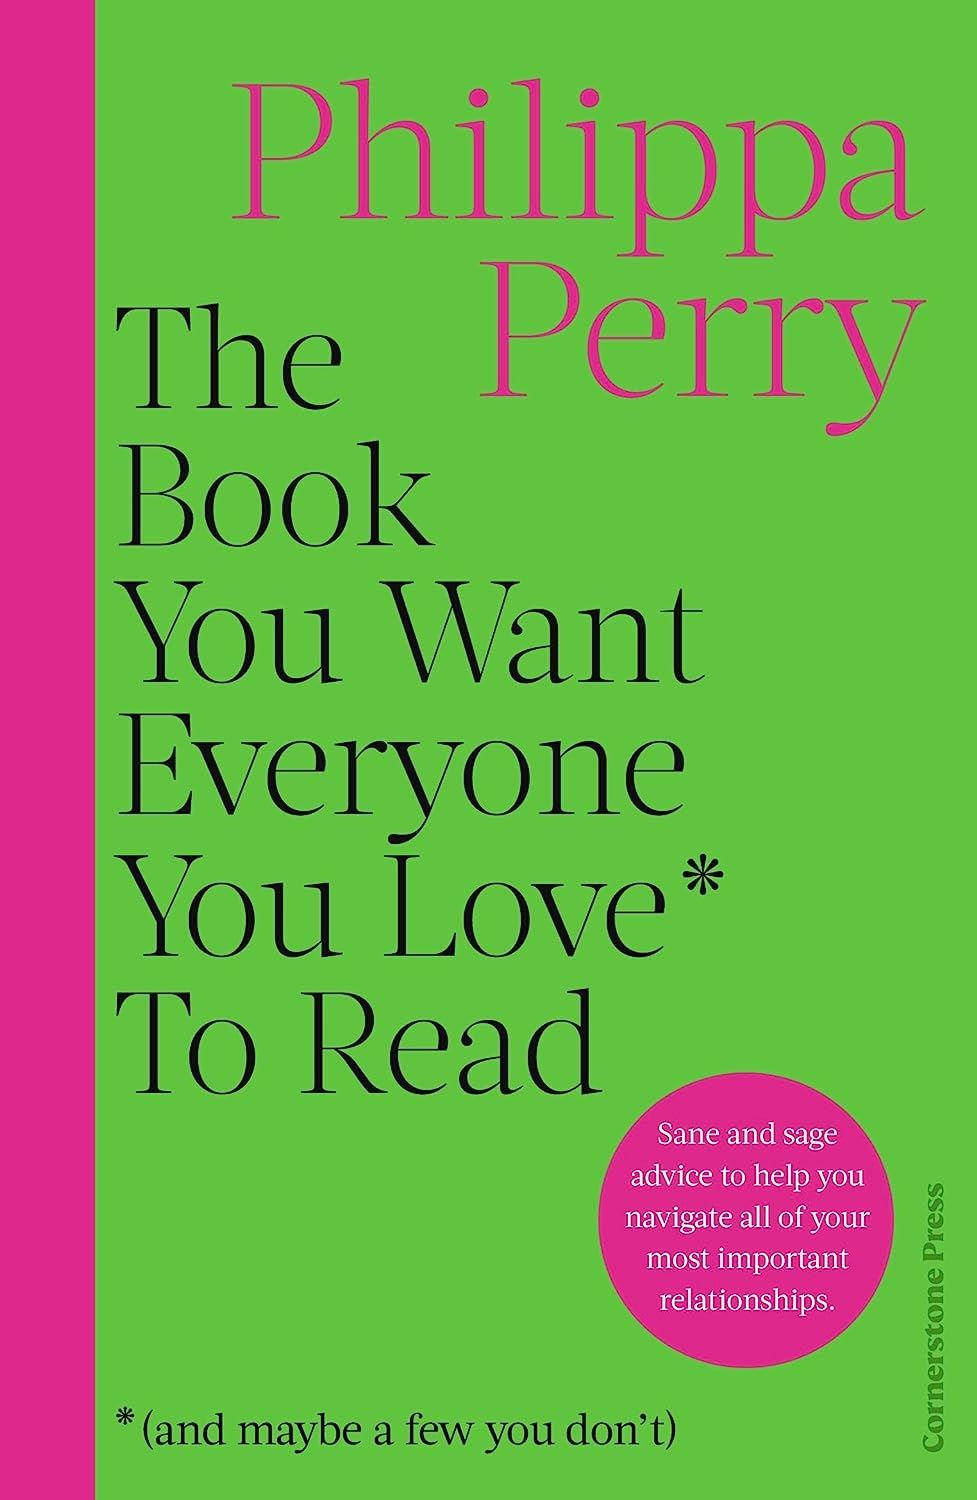 The Book You Wish Everyone You Love to Read | Philippa Perry